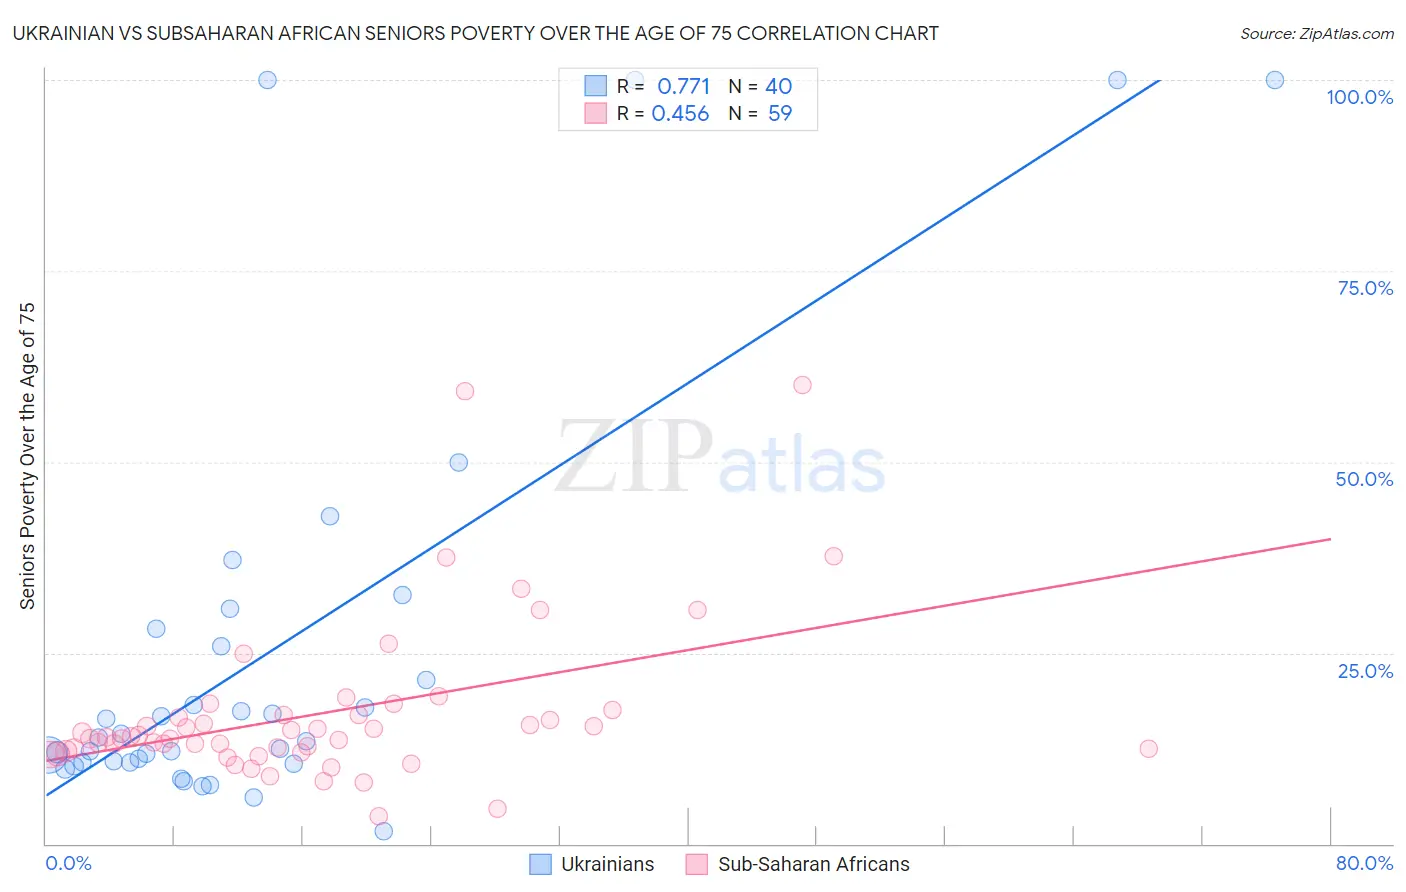 Ukrainian vs Subsaharan African Seniors Poverty Over the Age of 75